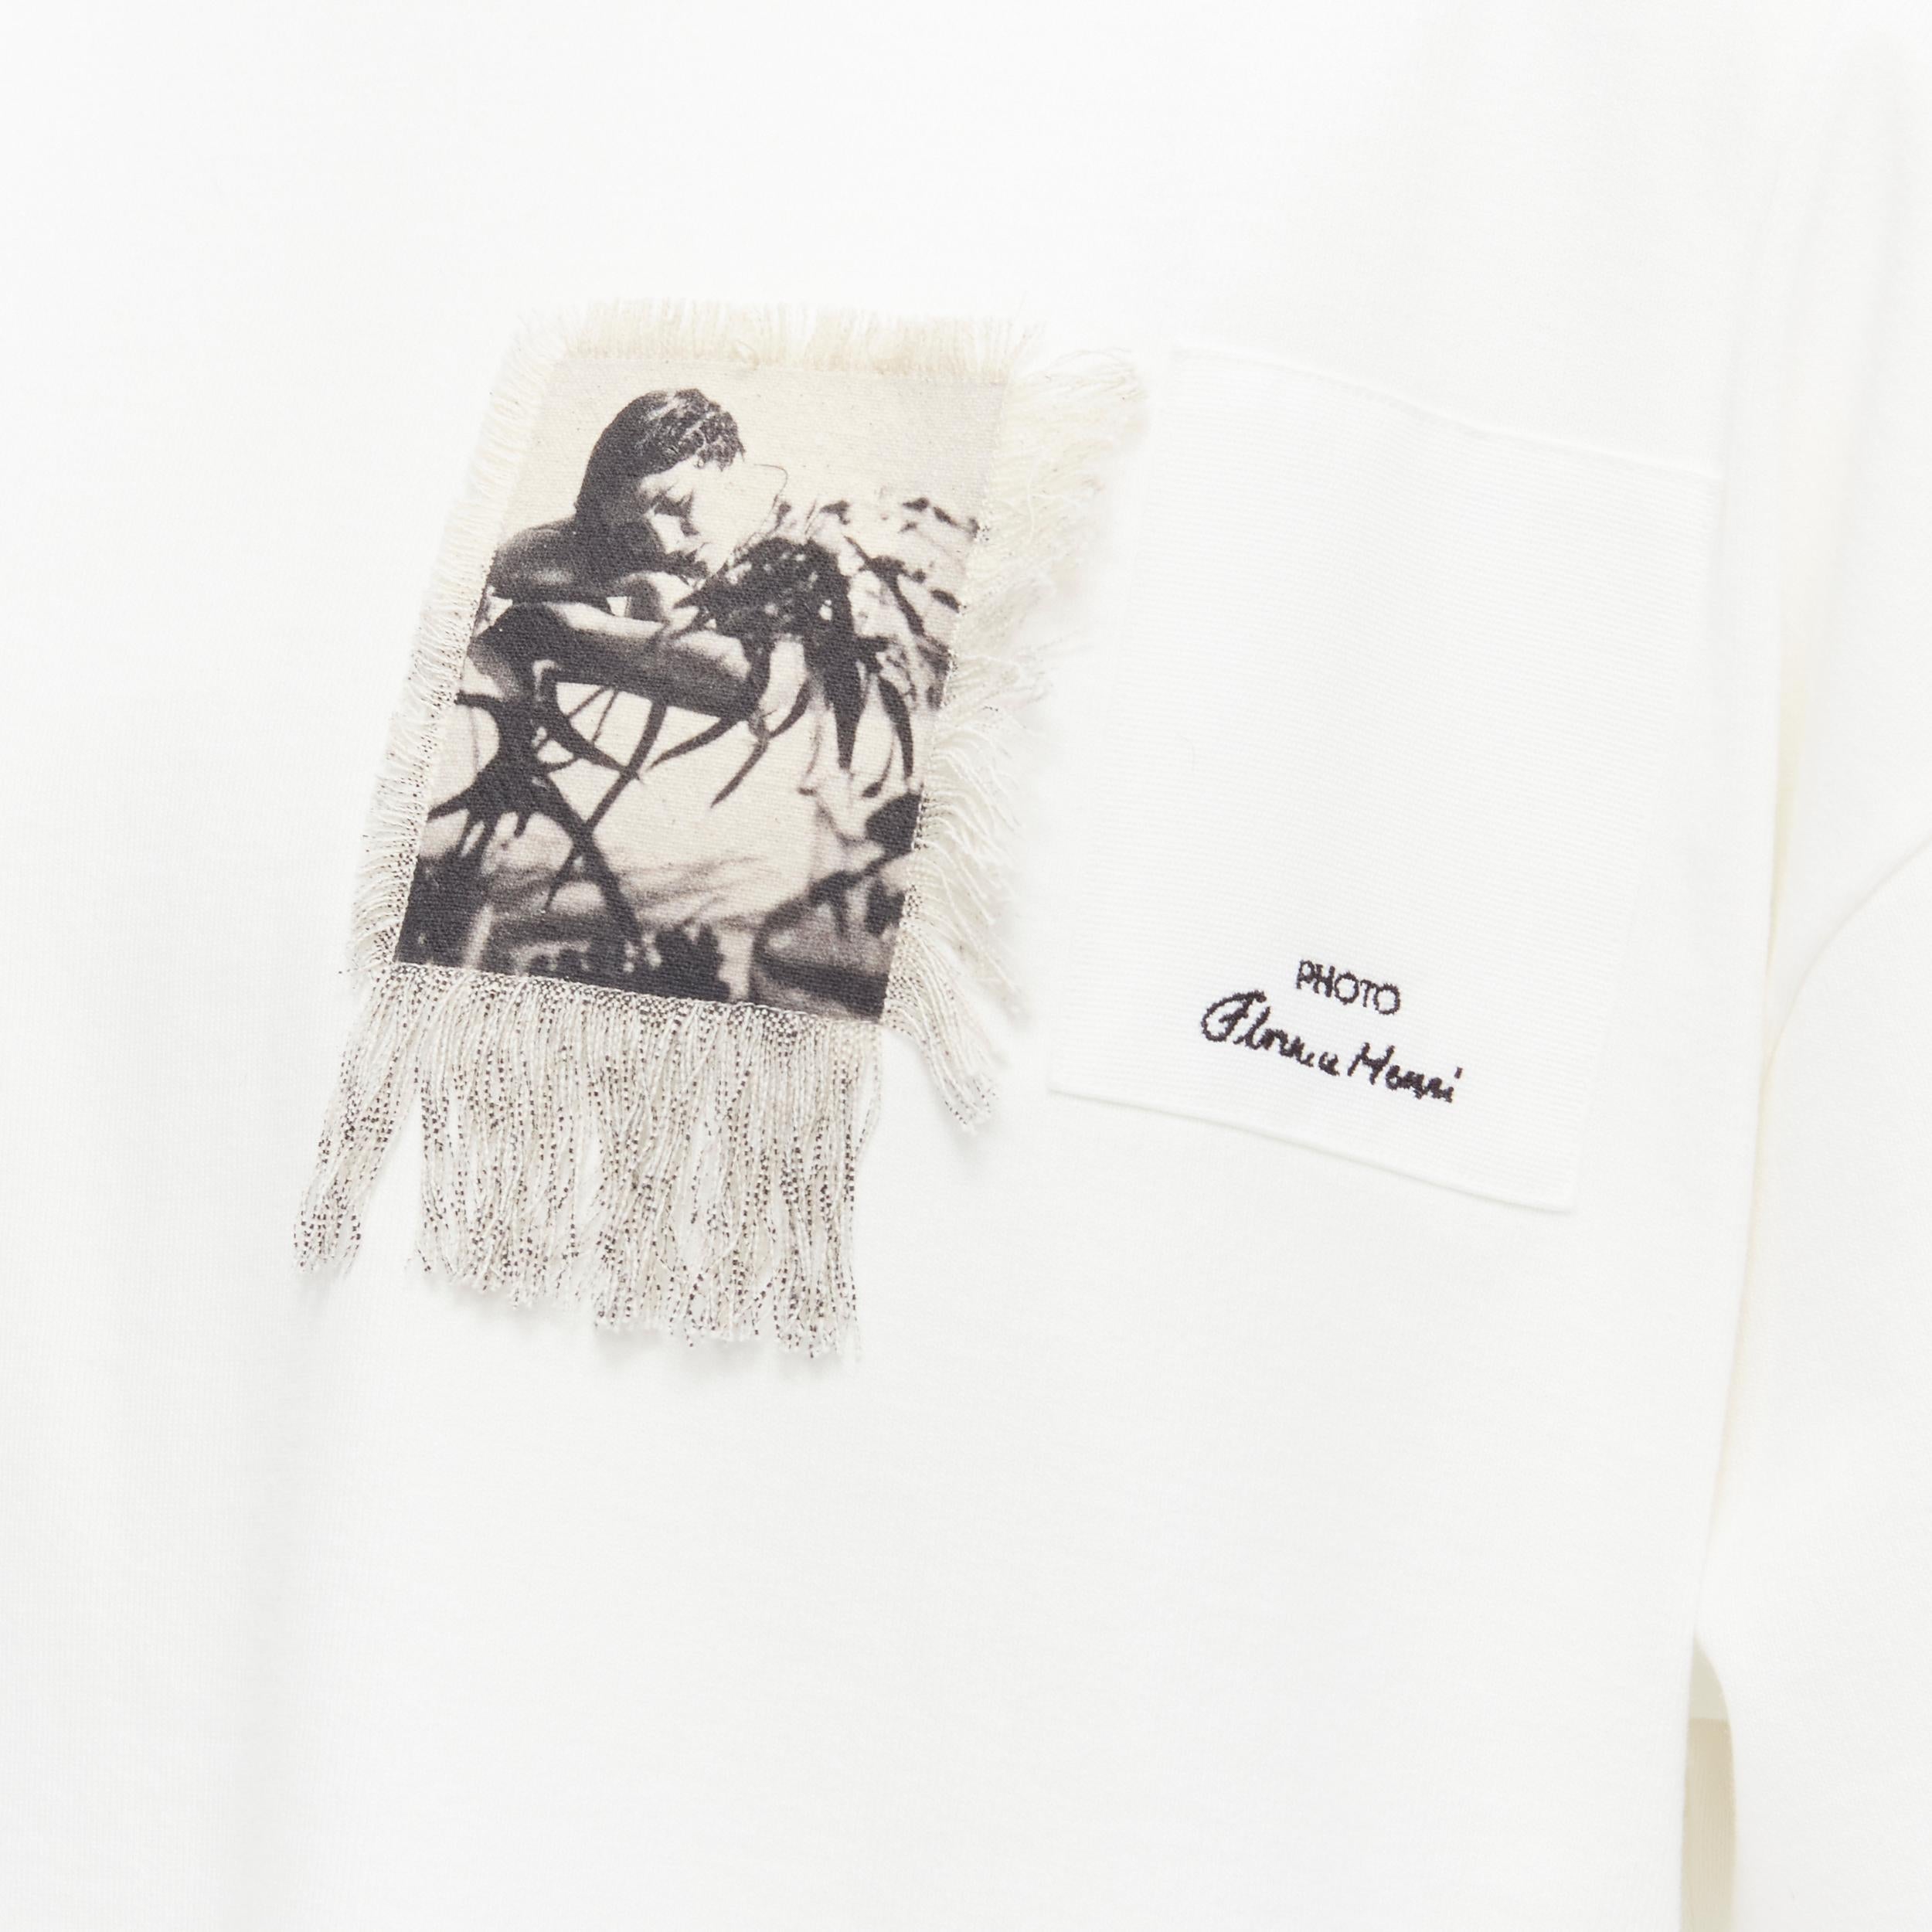 new JIL SANDER 2021 Florence Henri white photo patchwork boxy t-shirt XS 
Reference: CRTI/A00296 
Brand: Jil Sander 
Designer: Jil Sander
Collection: 2021 Fall Winter Runway 
Material: Cotton 
Color: White 
Pattern: Solid 
Extra Detail: Weighted